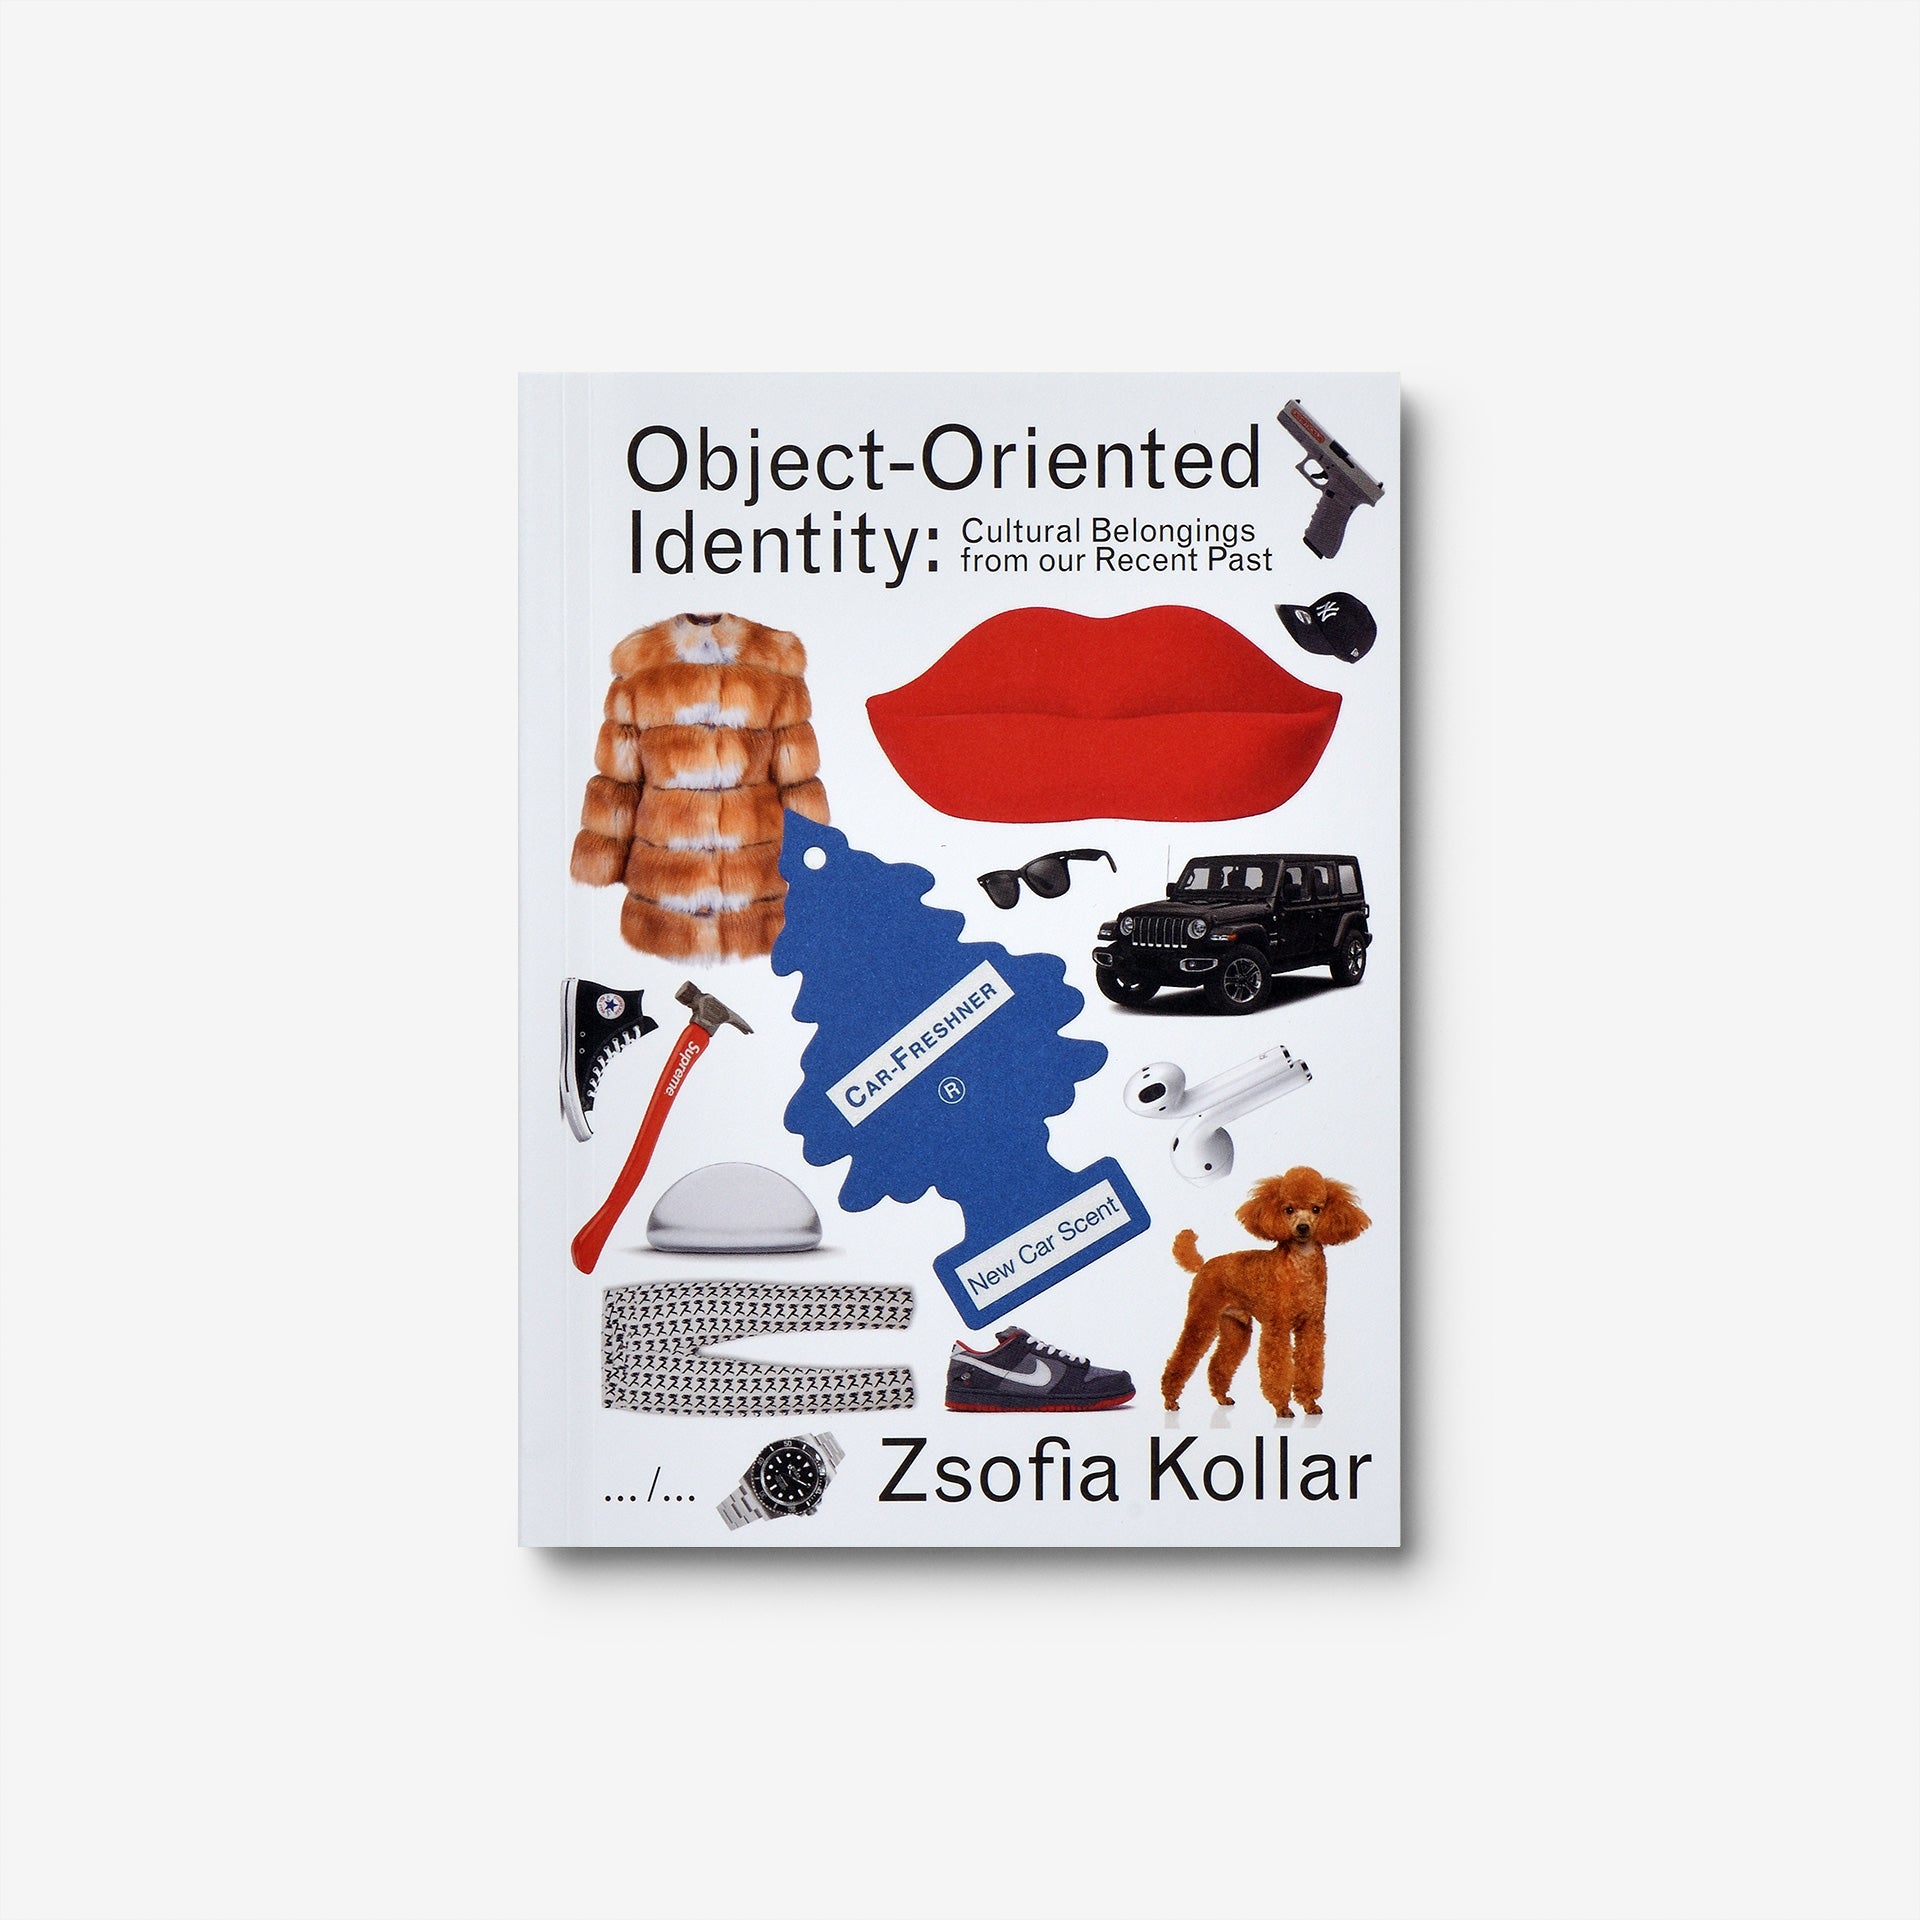 Object-Oriented Identity: Cultural Belongings from our Recent Past